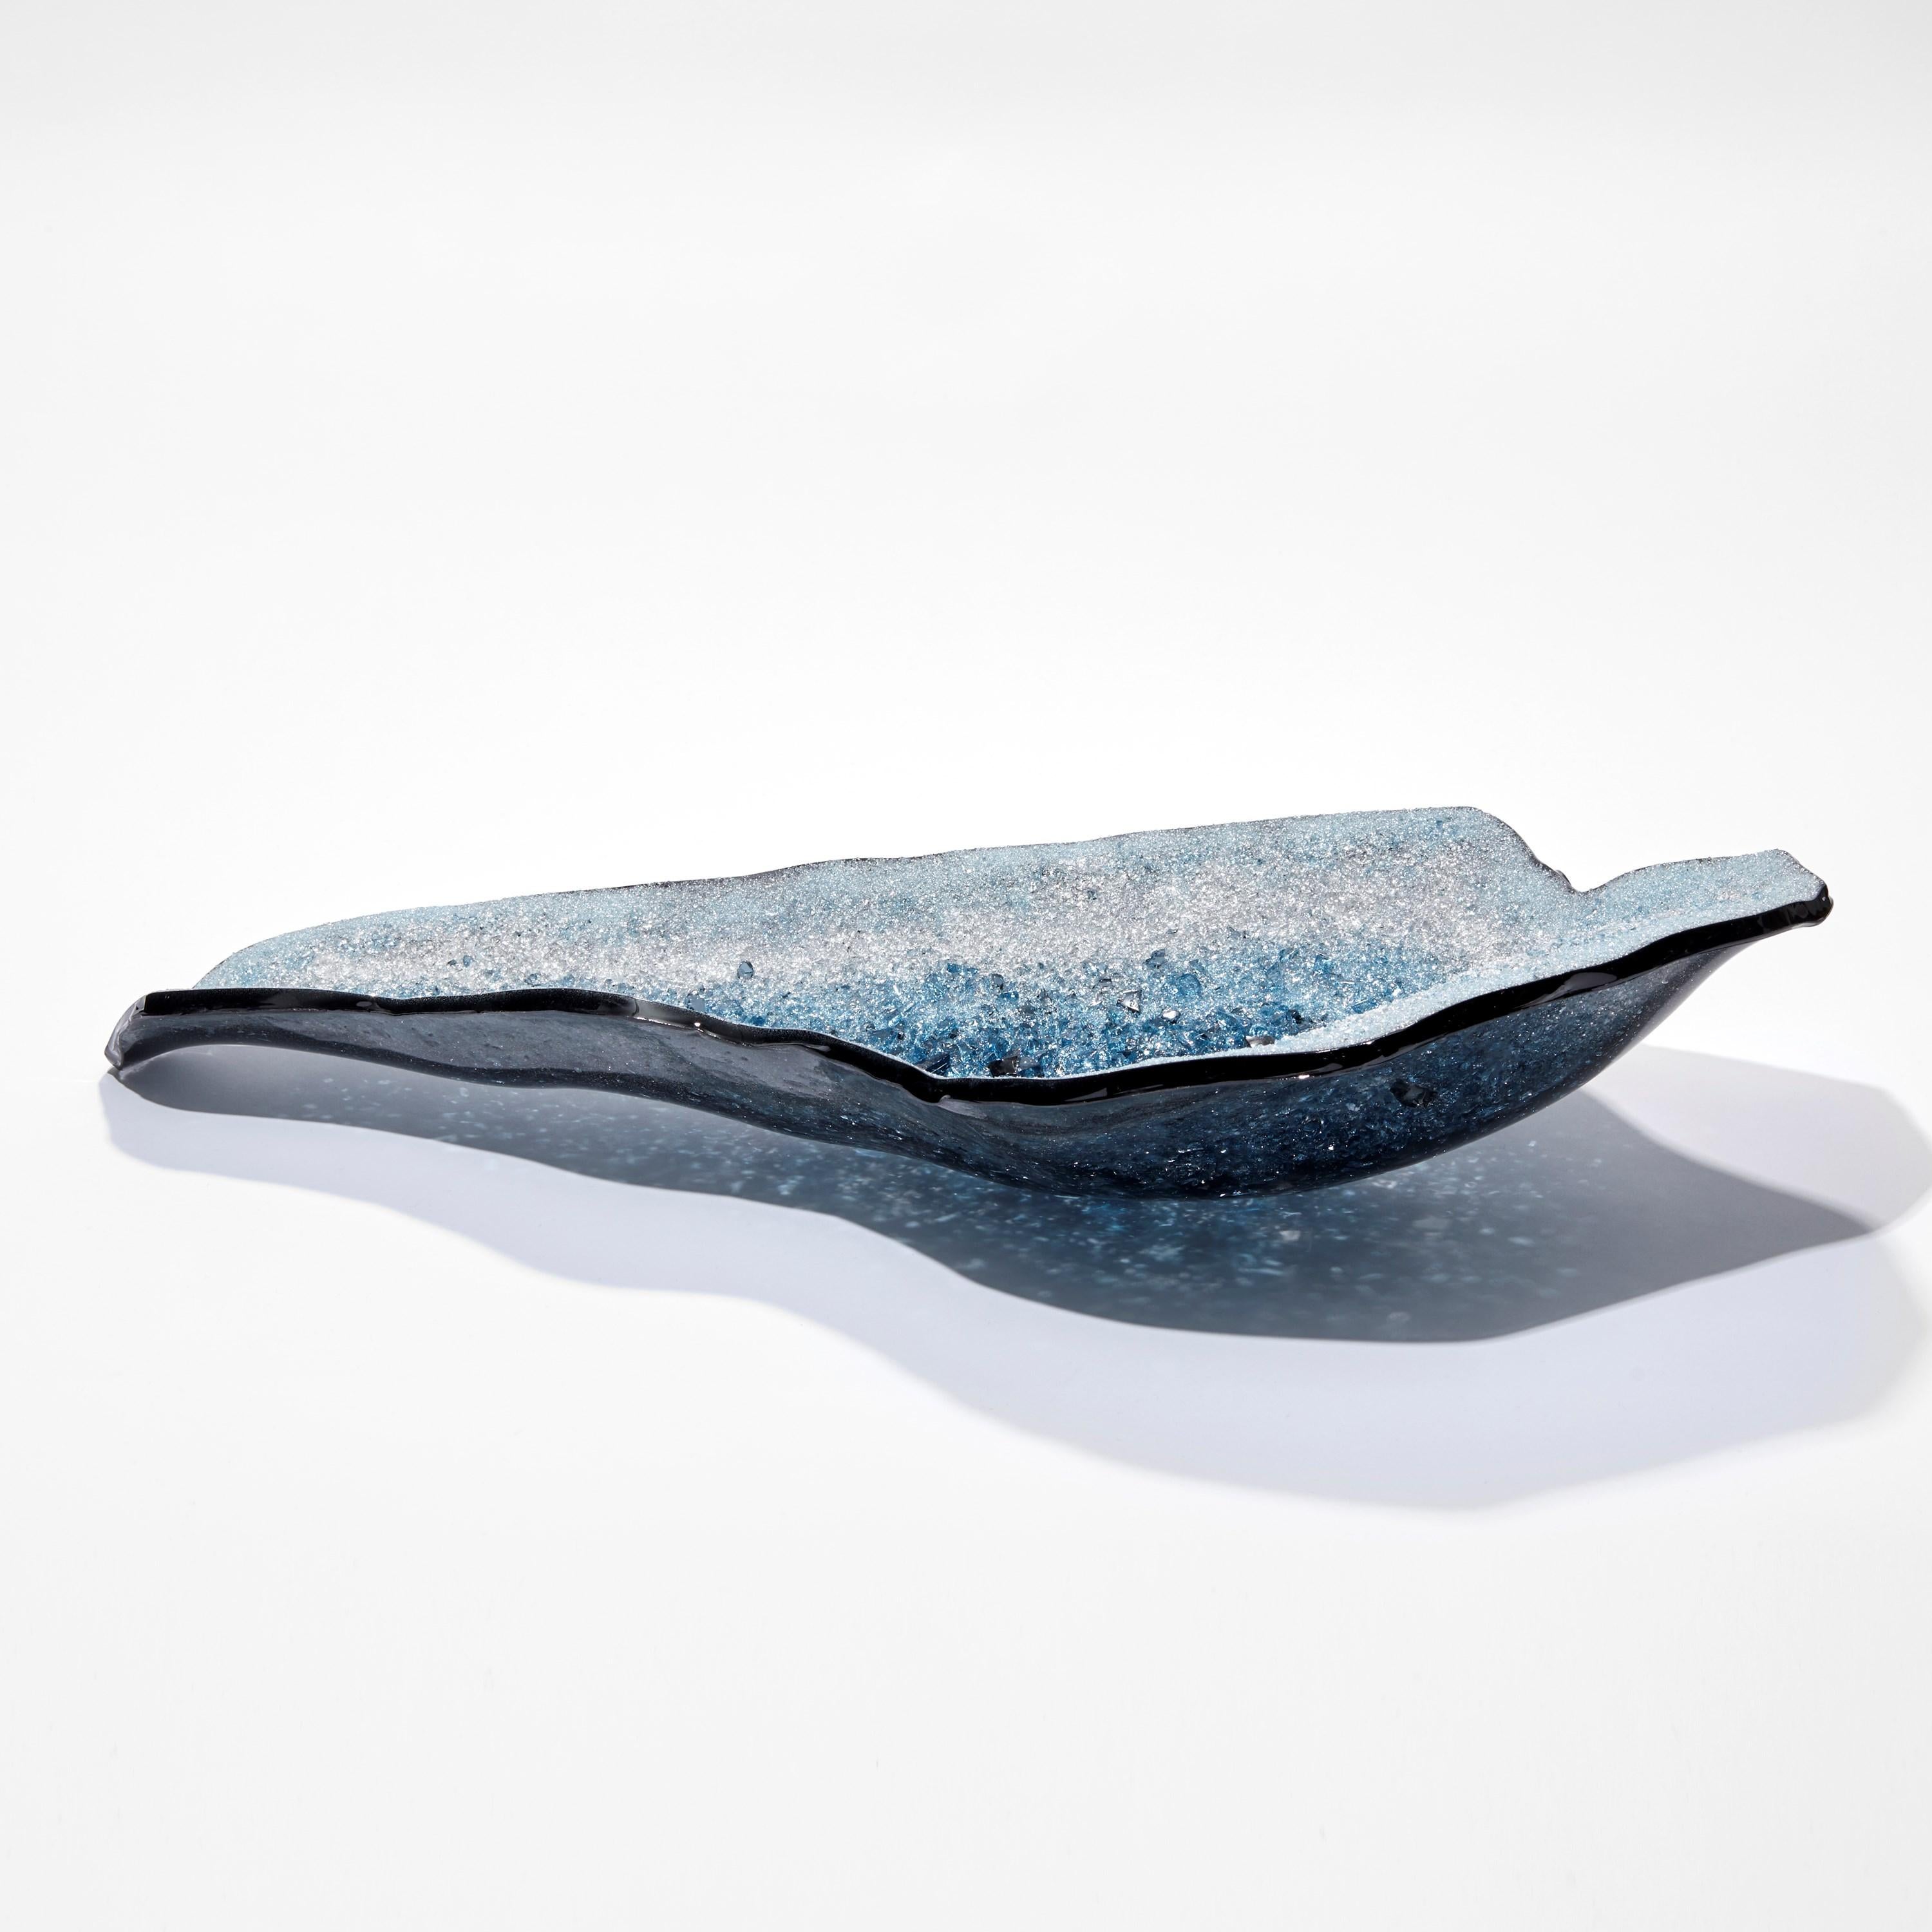 British Celestine viii, a Blue & Turquoise Geode Theme Glass Sculpture by Wayne Charmer For Sale